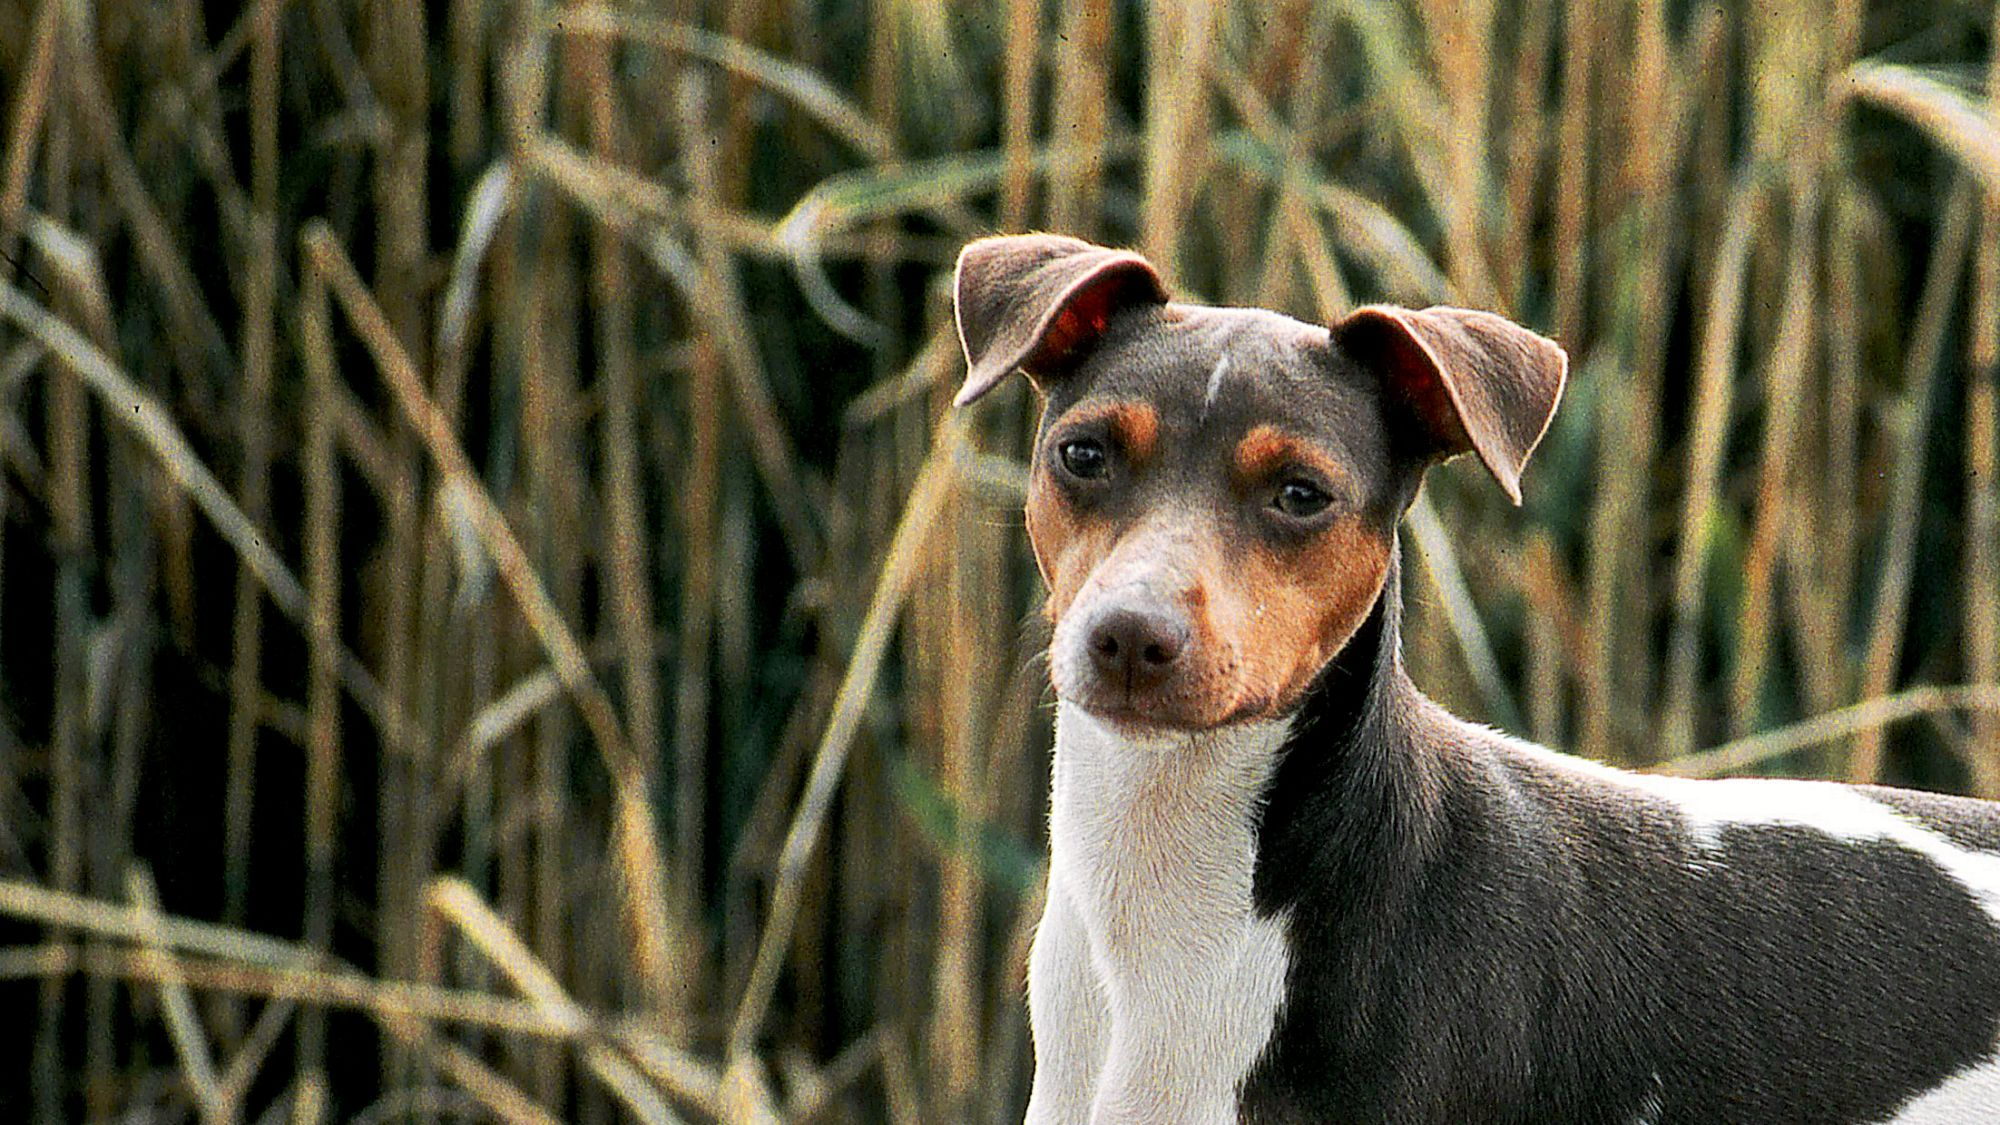 Brazilian Terrier standing in front of dried grasses